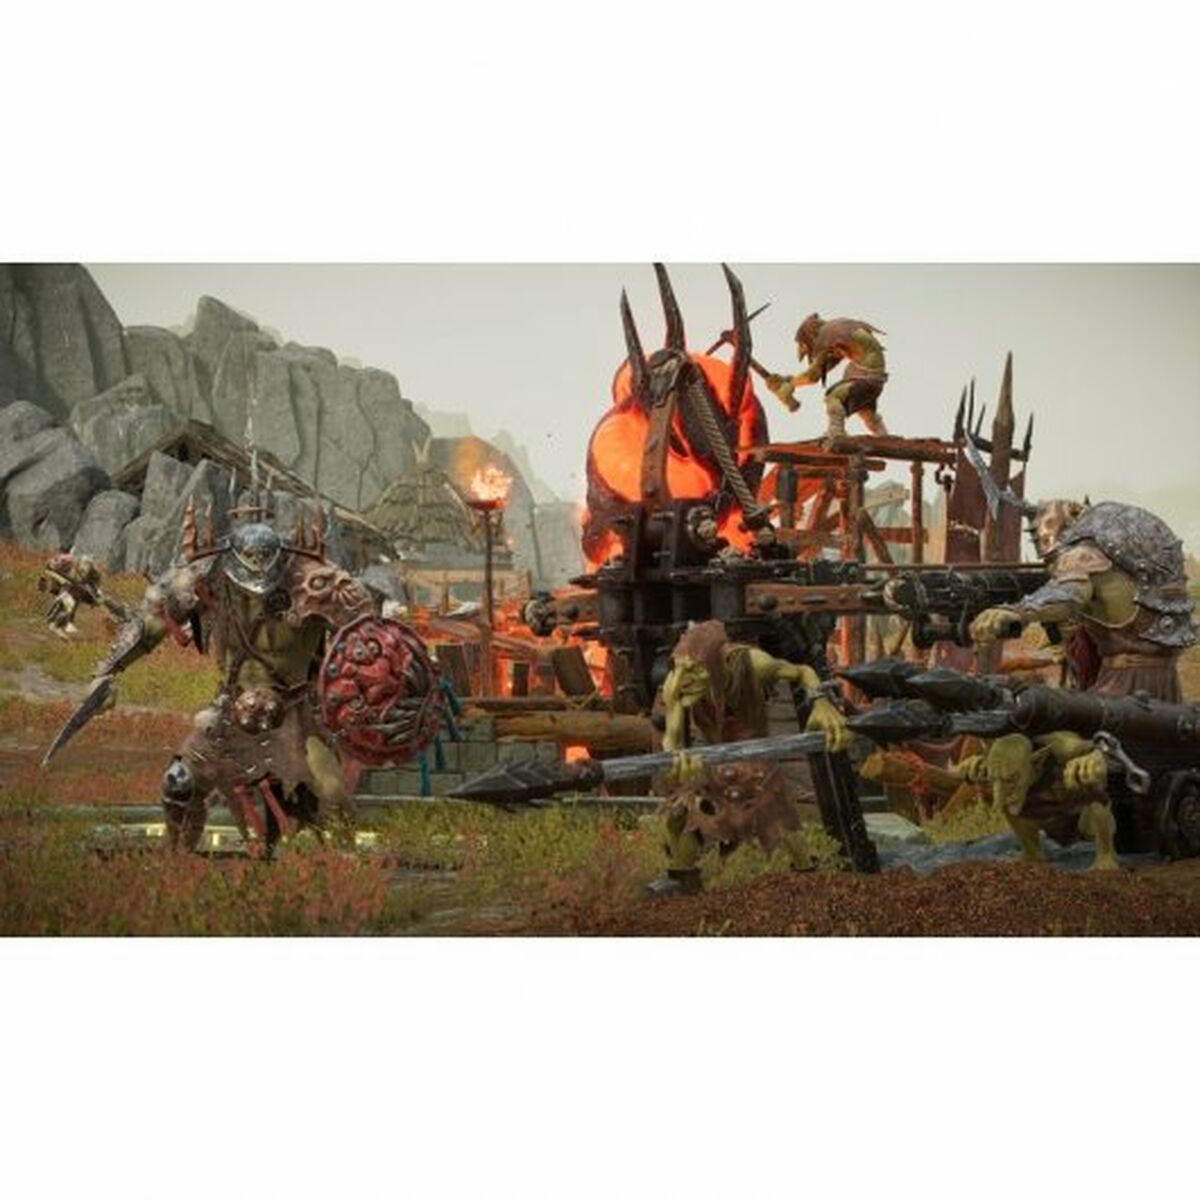 Videogioco per Xbox Series X Bumble3ee Warhammer Age of Sigmar: Realms of Ruin